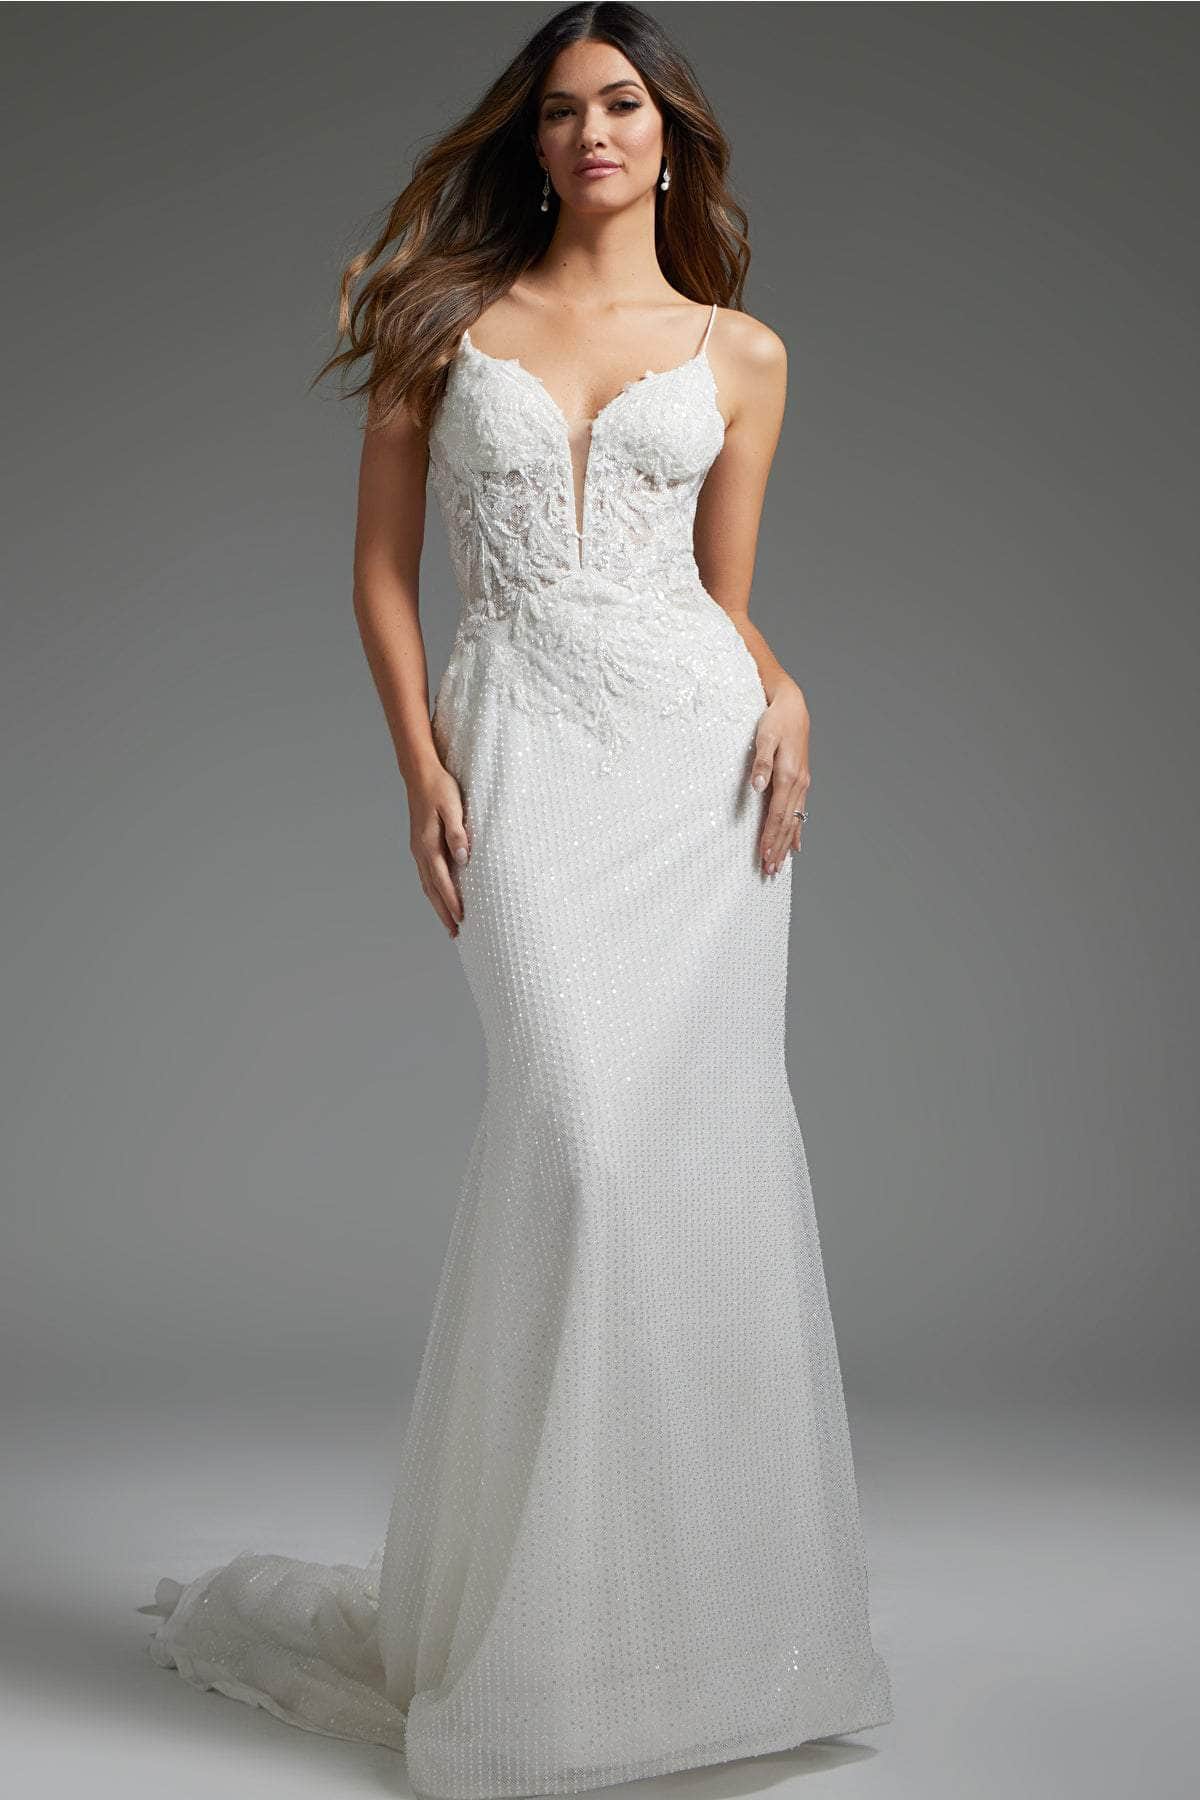 Jovani JB40639 - Beaded Appliqued Plunging Bridal Gown
